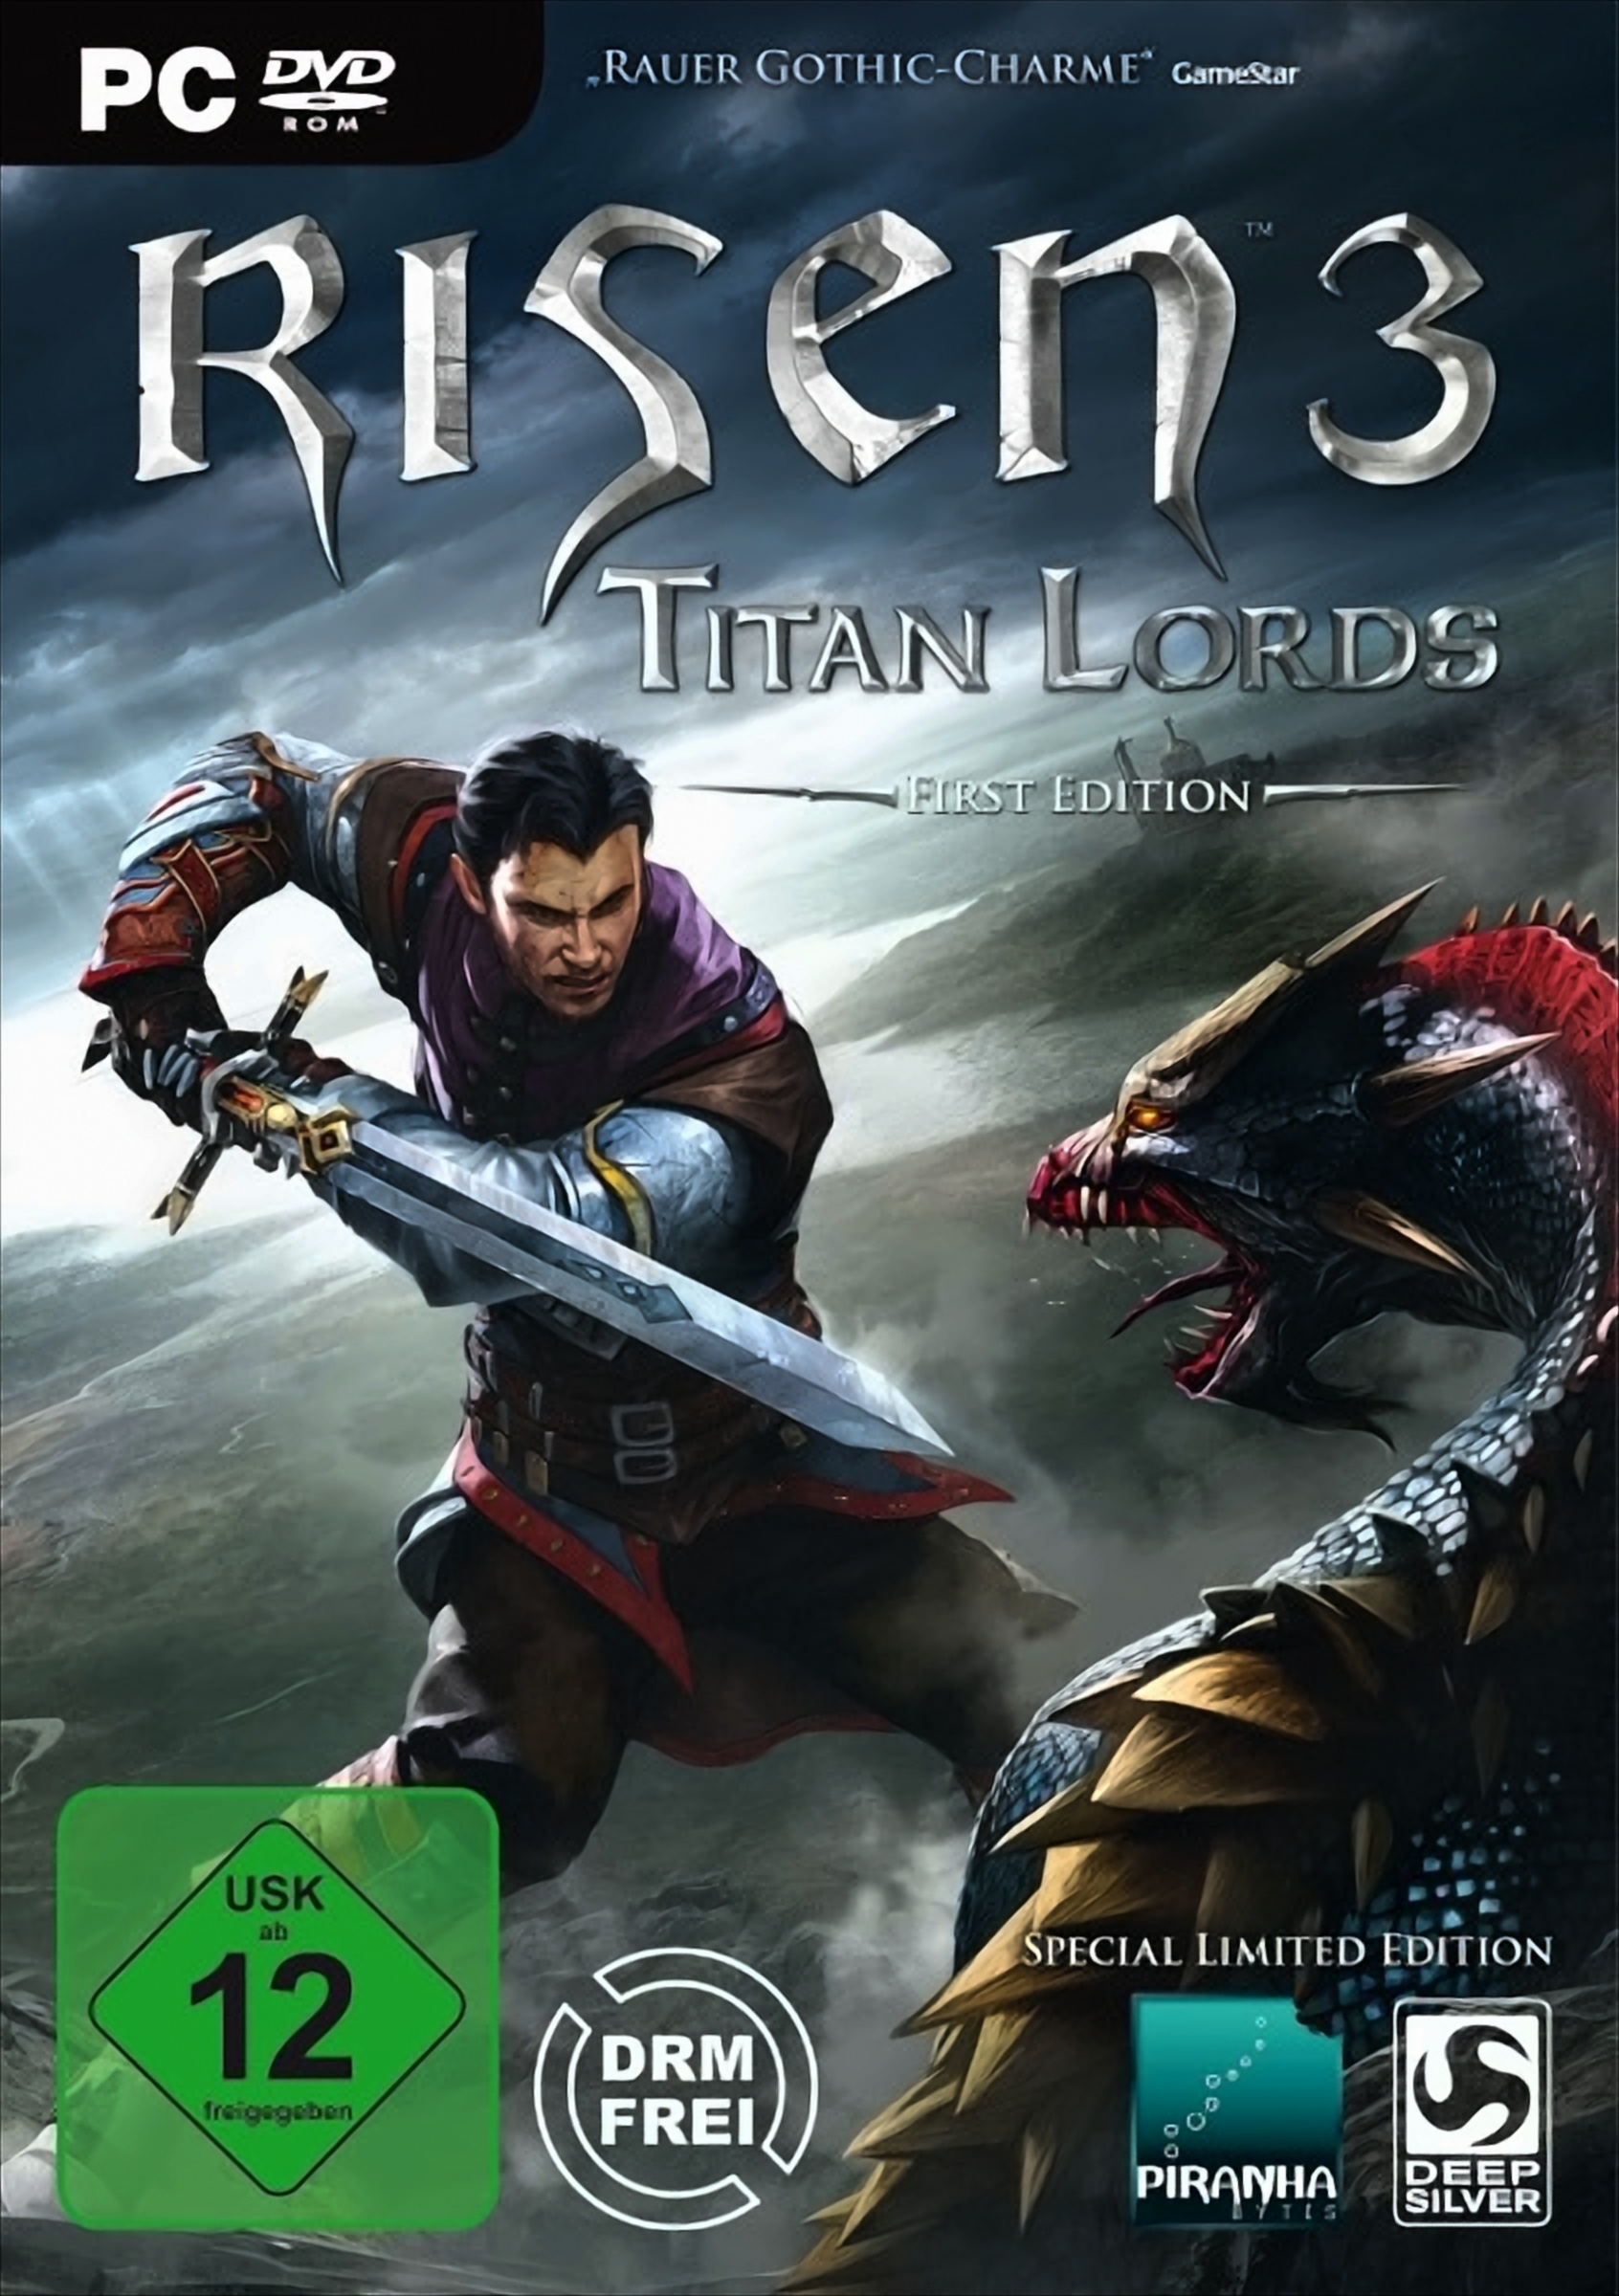 Titan [PC] (USK) 3: Lords Special Limited Edition Risen - (PC)